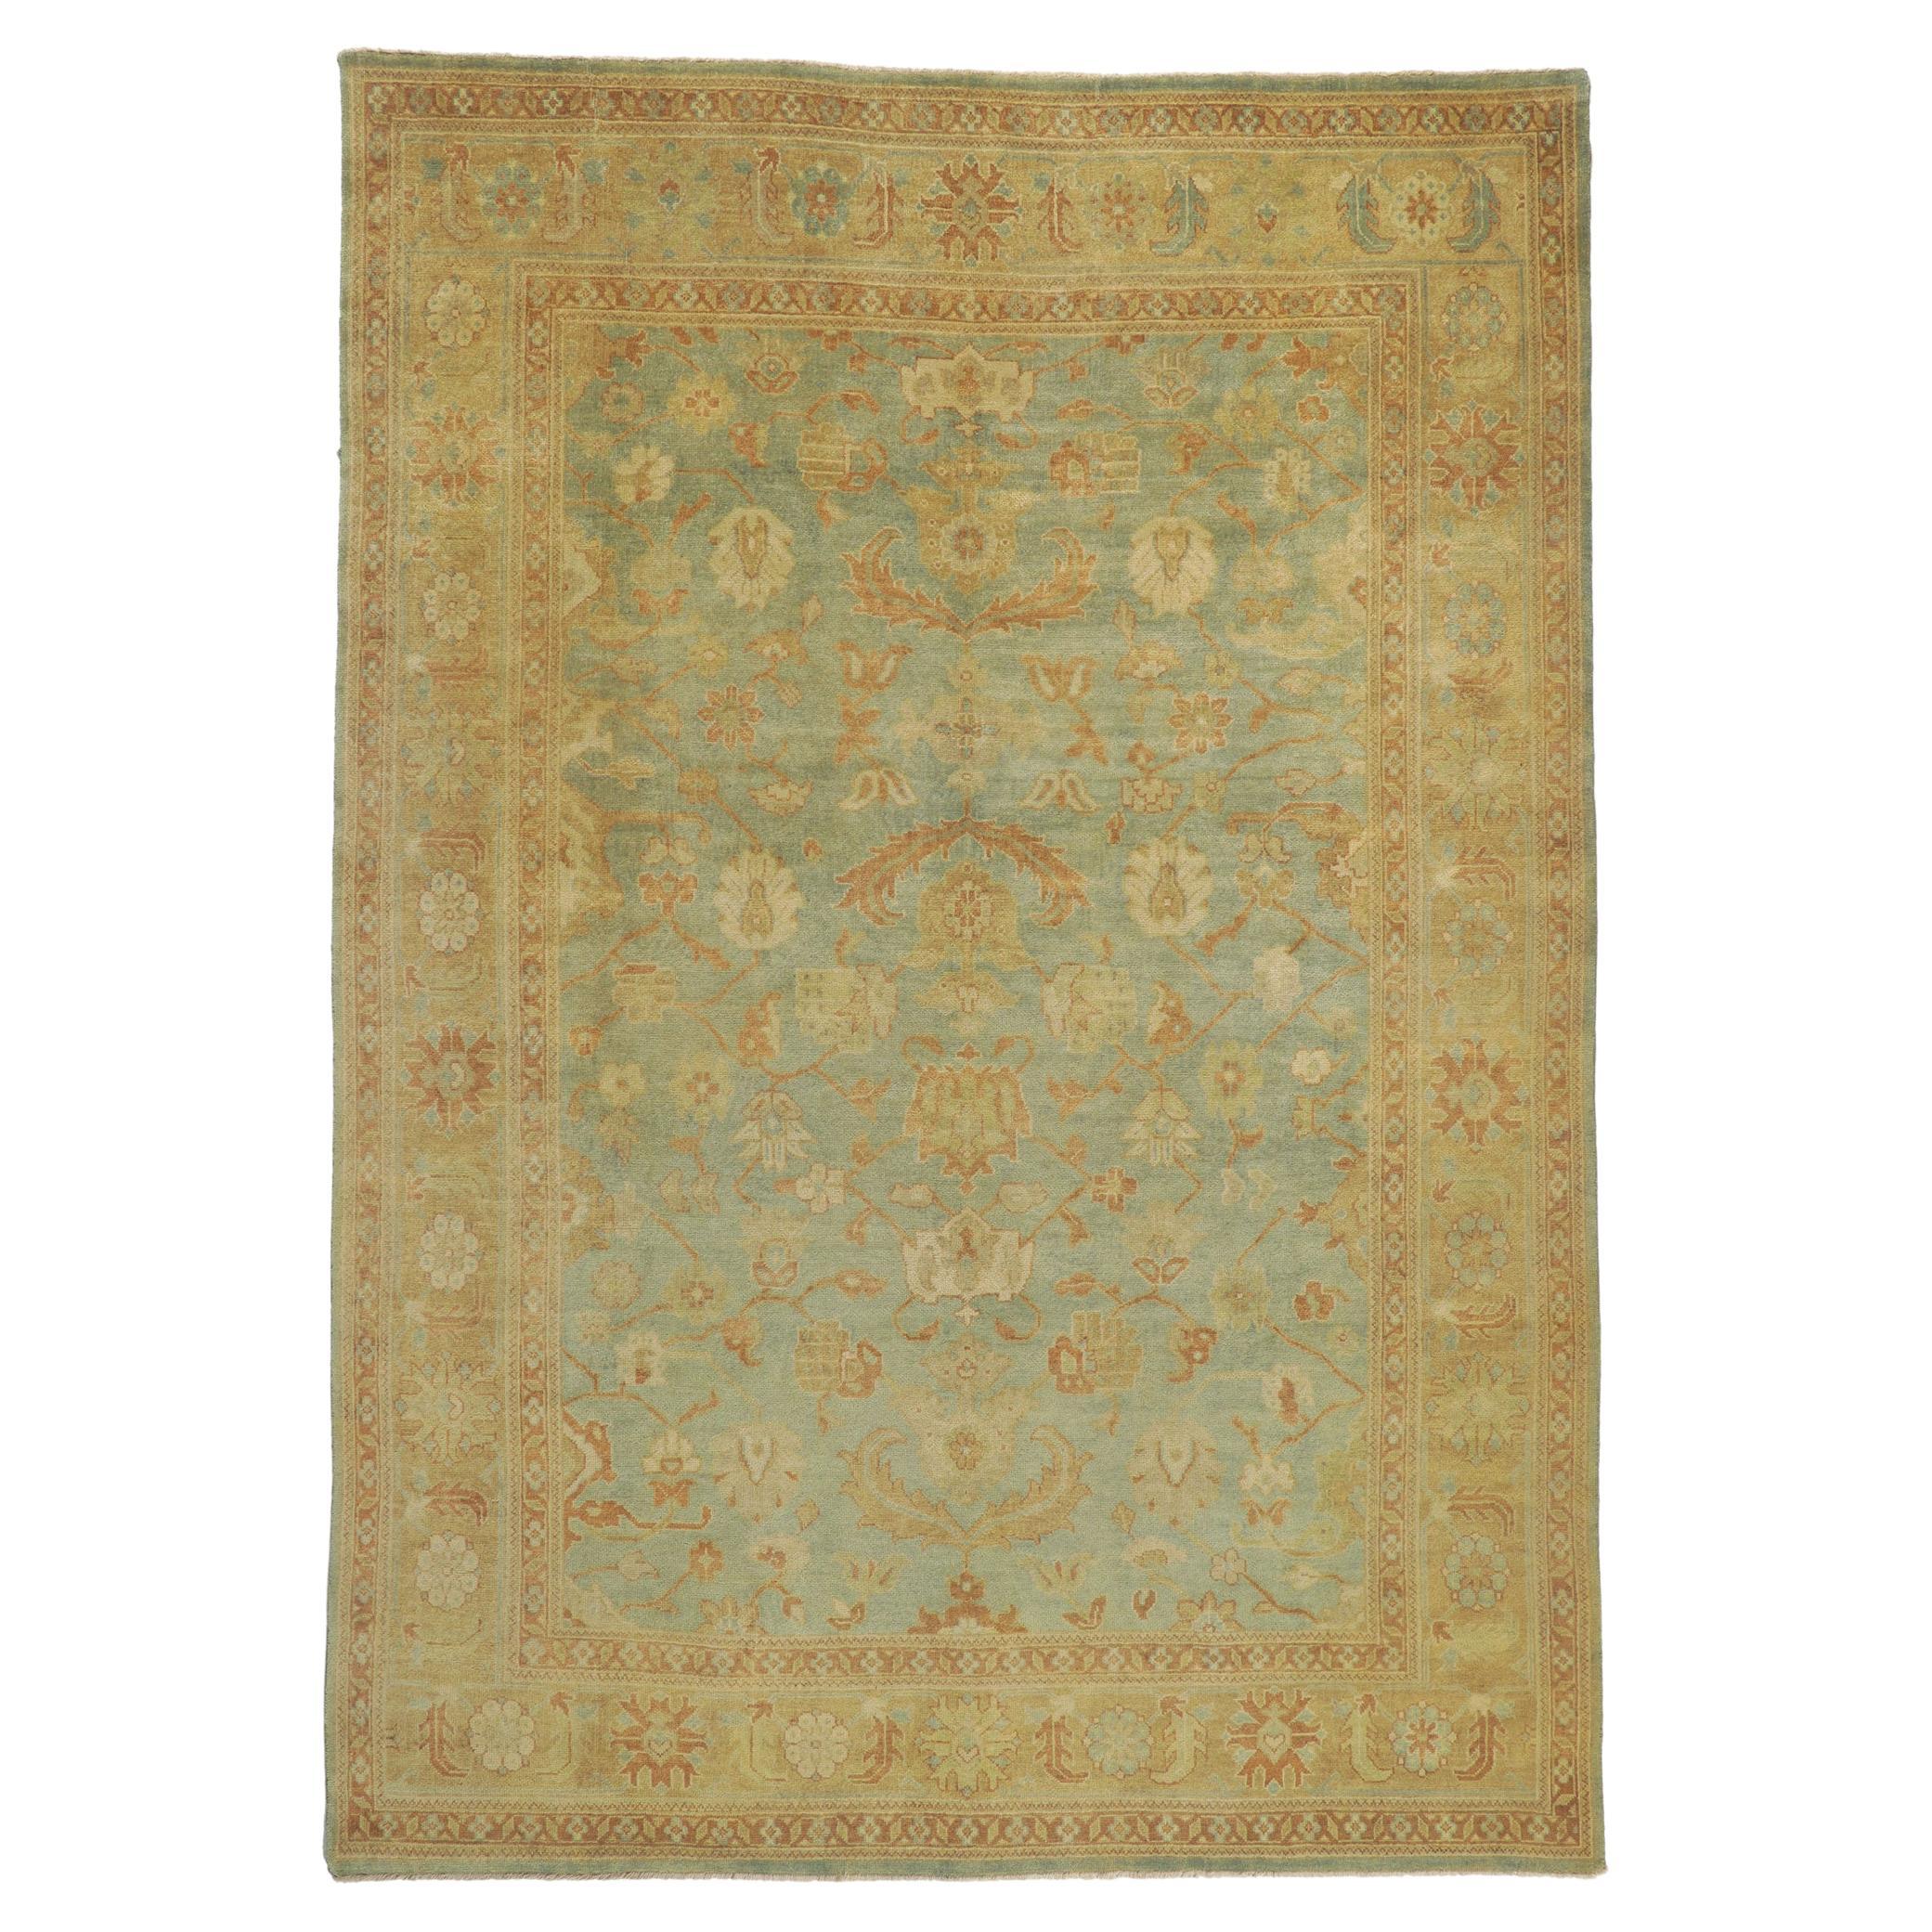 New Vintage-Inspired Oushak Rug with Earth-Tone Colors For Sale